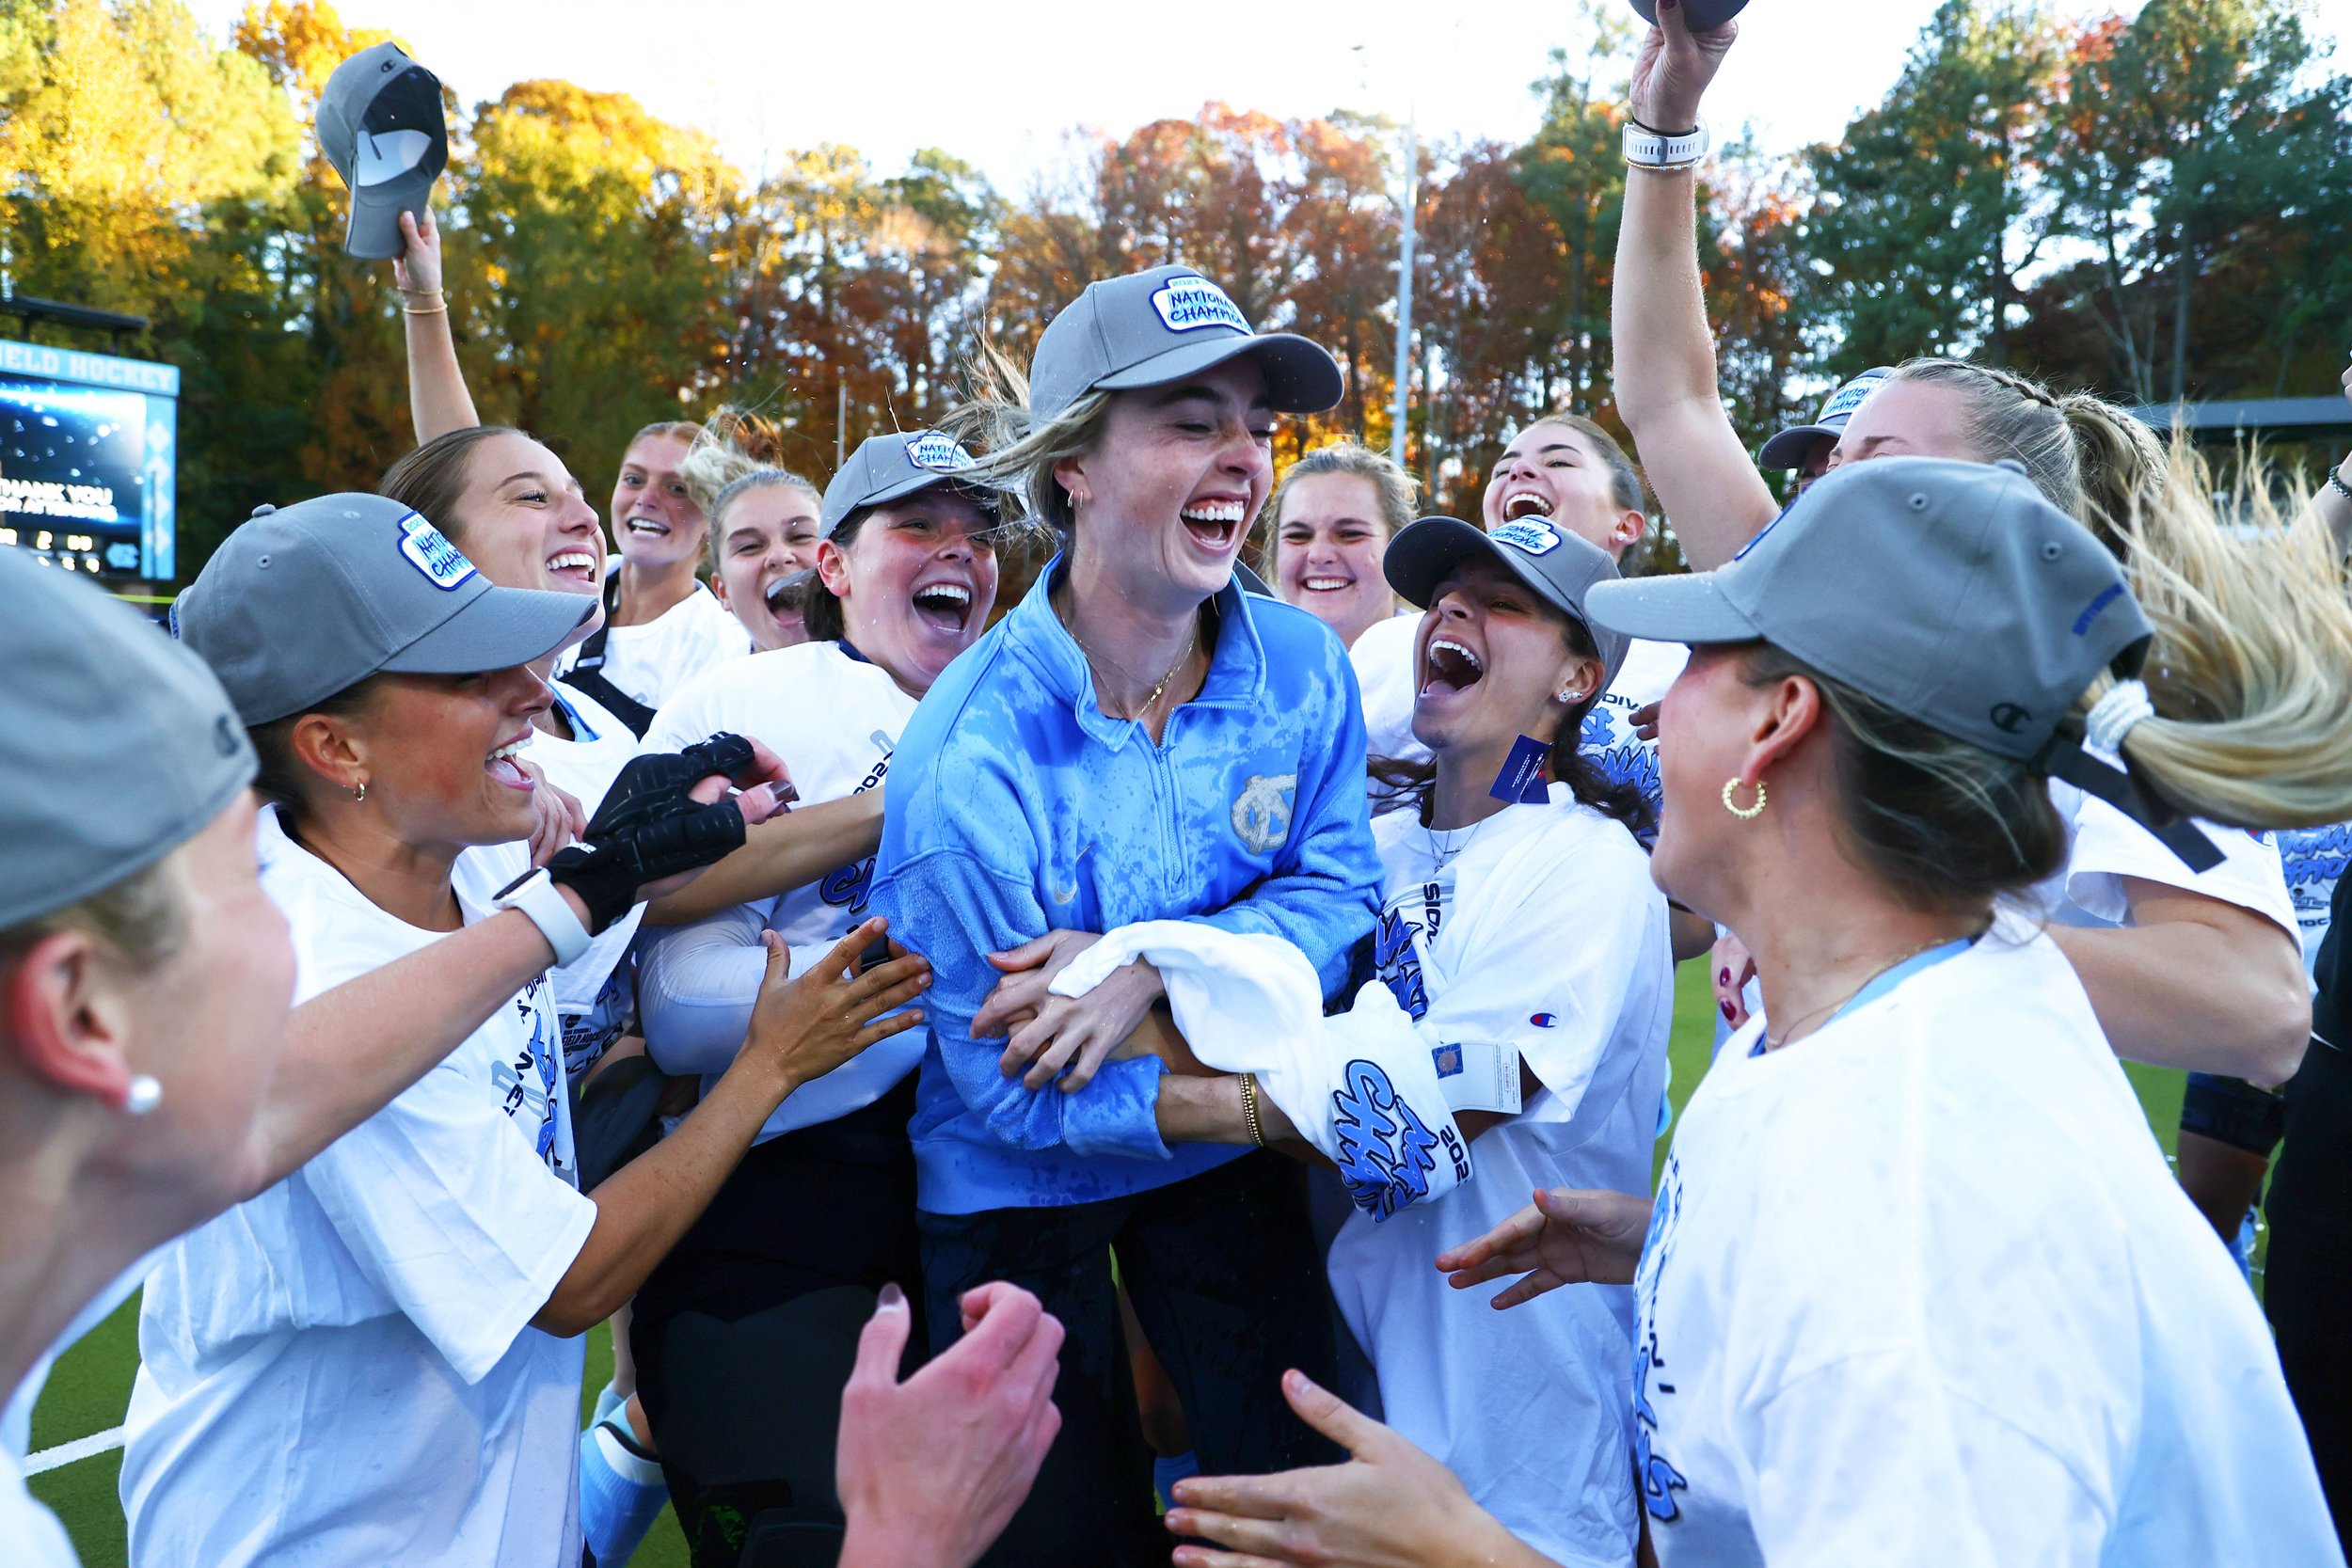  CHAPEL HILL, NORTH CAROLINA - NOVEMBER 19: Head Coach Erin Matson of the North Carolina Tar Heels celebrates with her team after defeating the Northwestern Wildcats for the national title during the Division I Women’s Field Hockey Championship held 